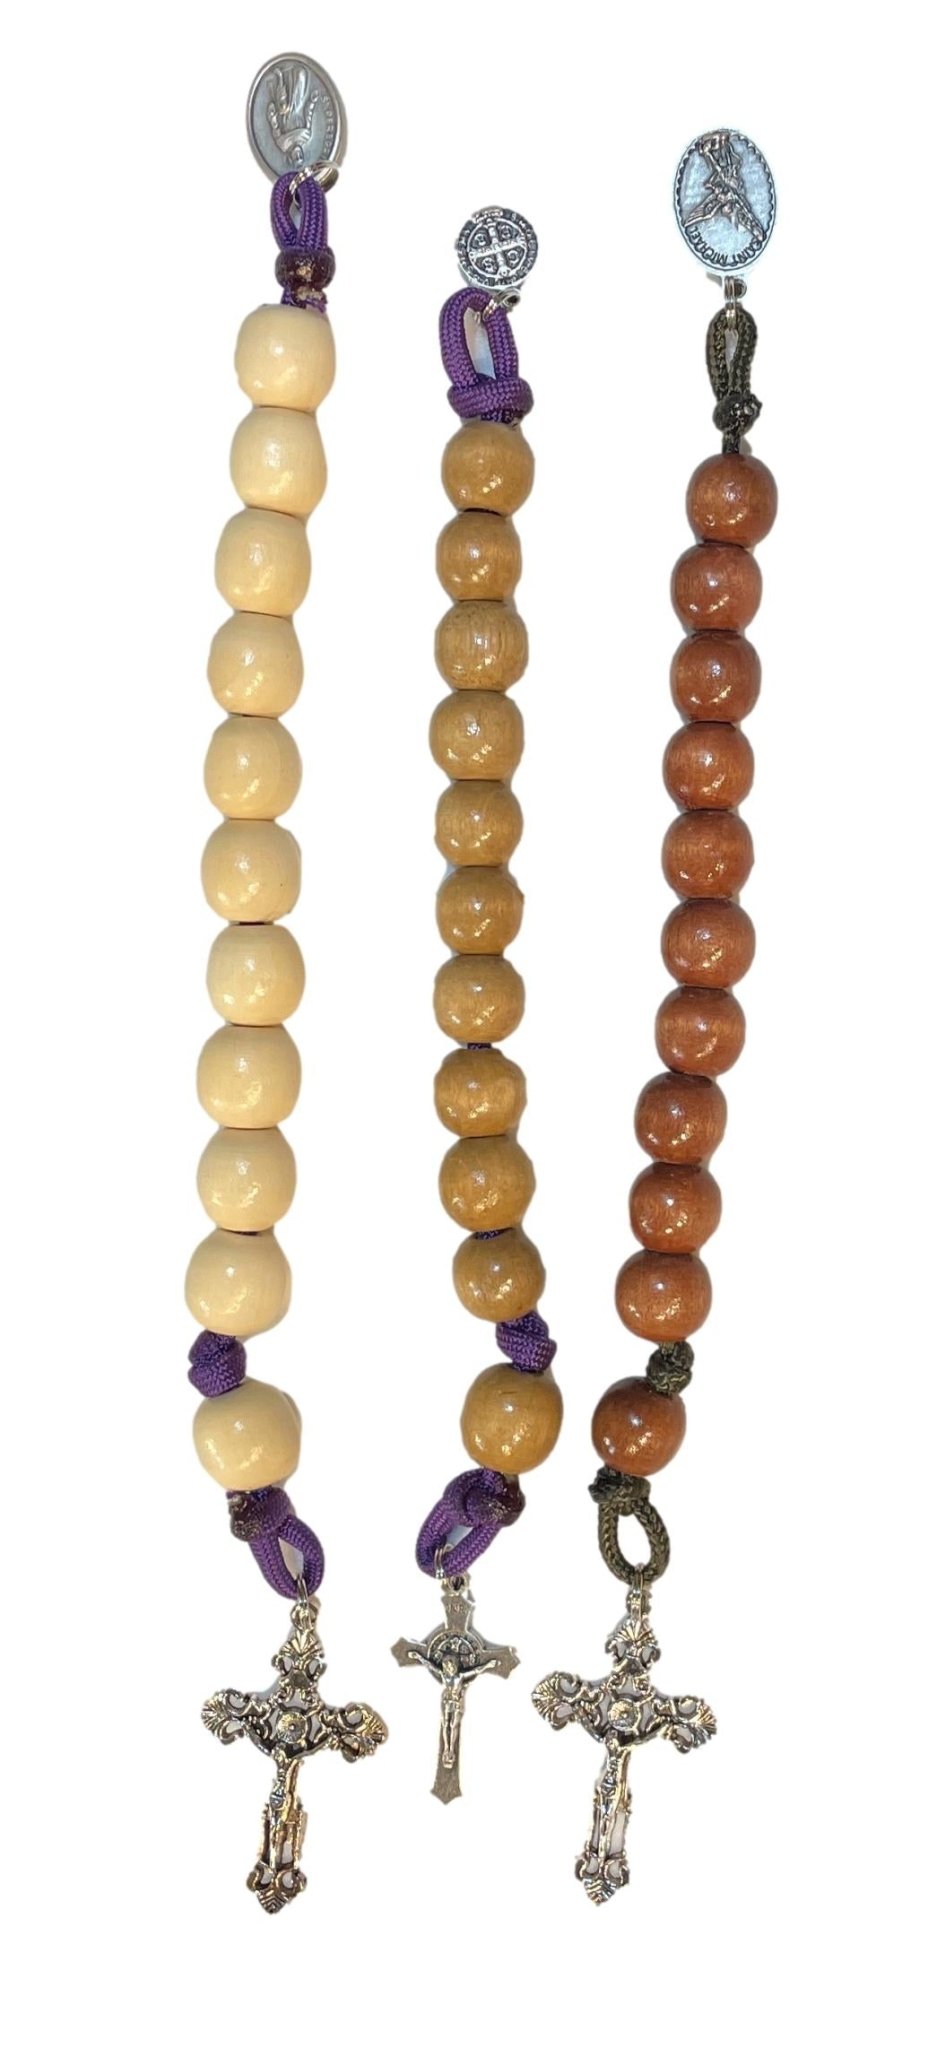 Rustic Rosary Large Wood Beads Handcrafted Ysleta Mission Gift Shop